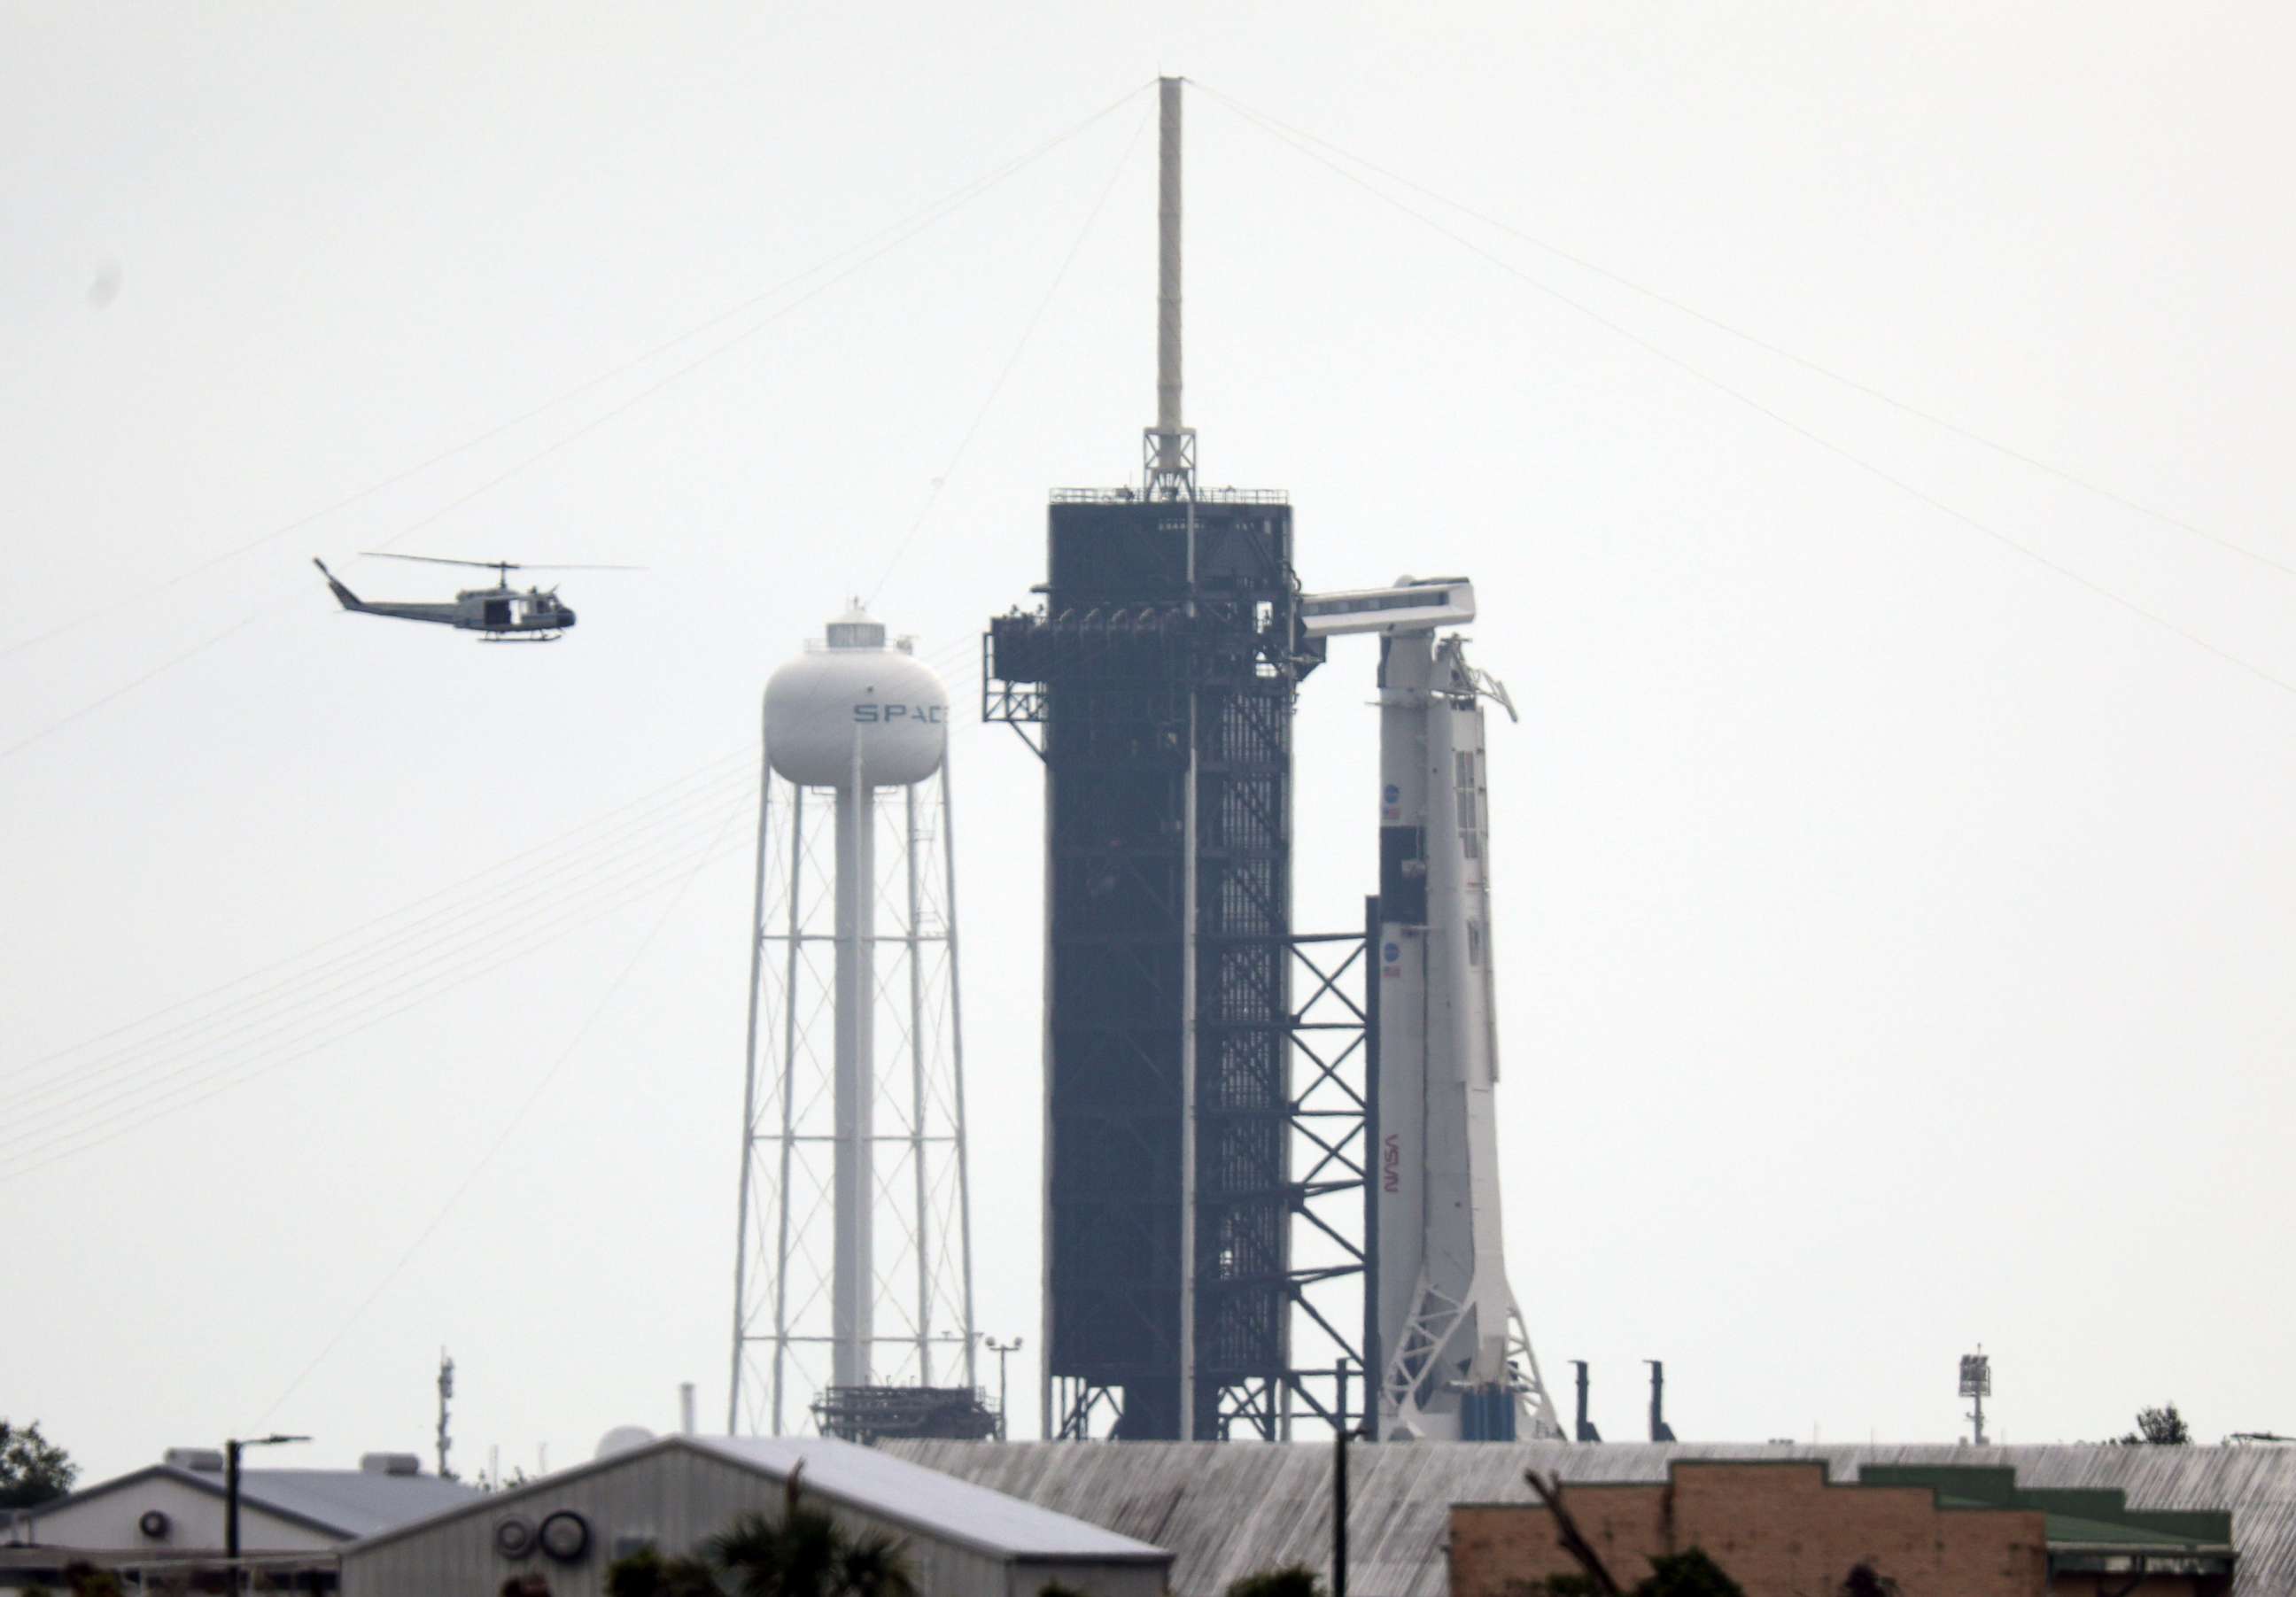 PHOTO: NASA security helicopter flies past launch complex 39A and the SpaceX Falcon 9 rocket with Crew Dragon vehicle on launch day at the Kennedy Space Center in Florida on May 26, 2020.